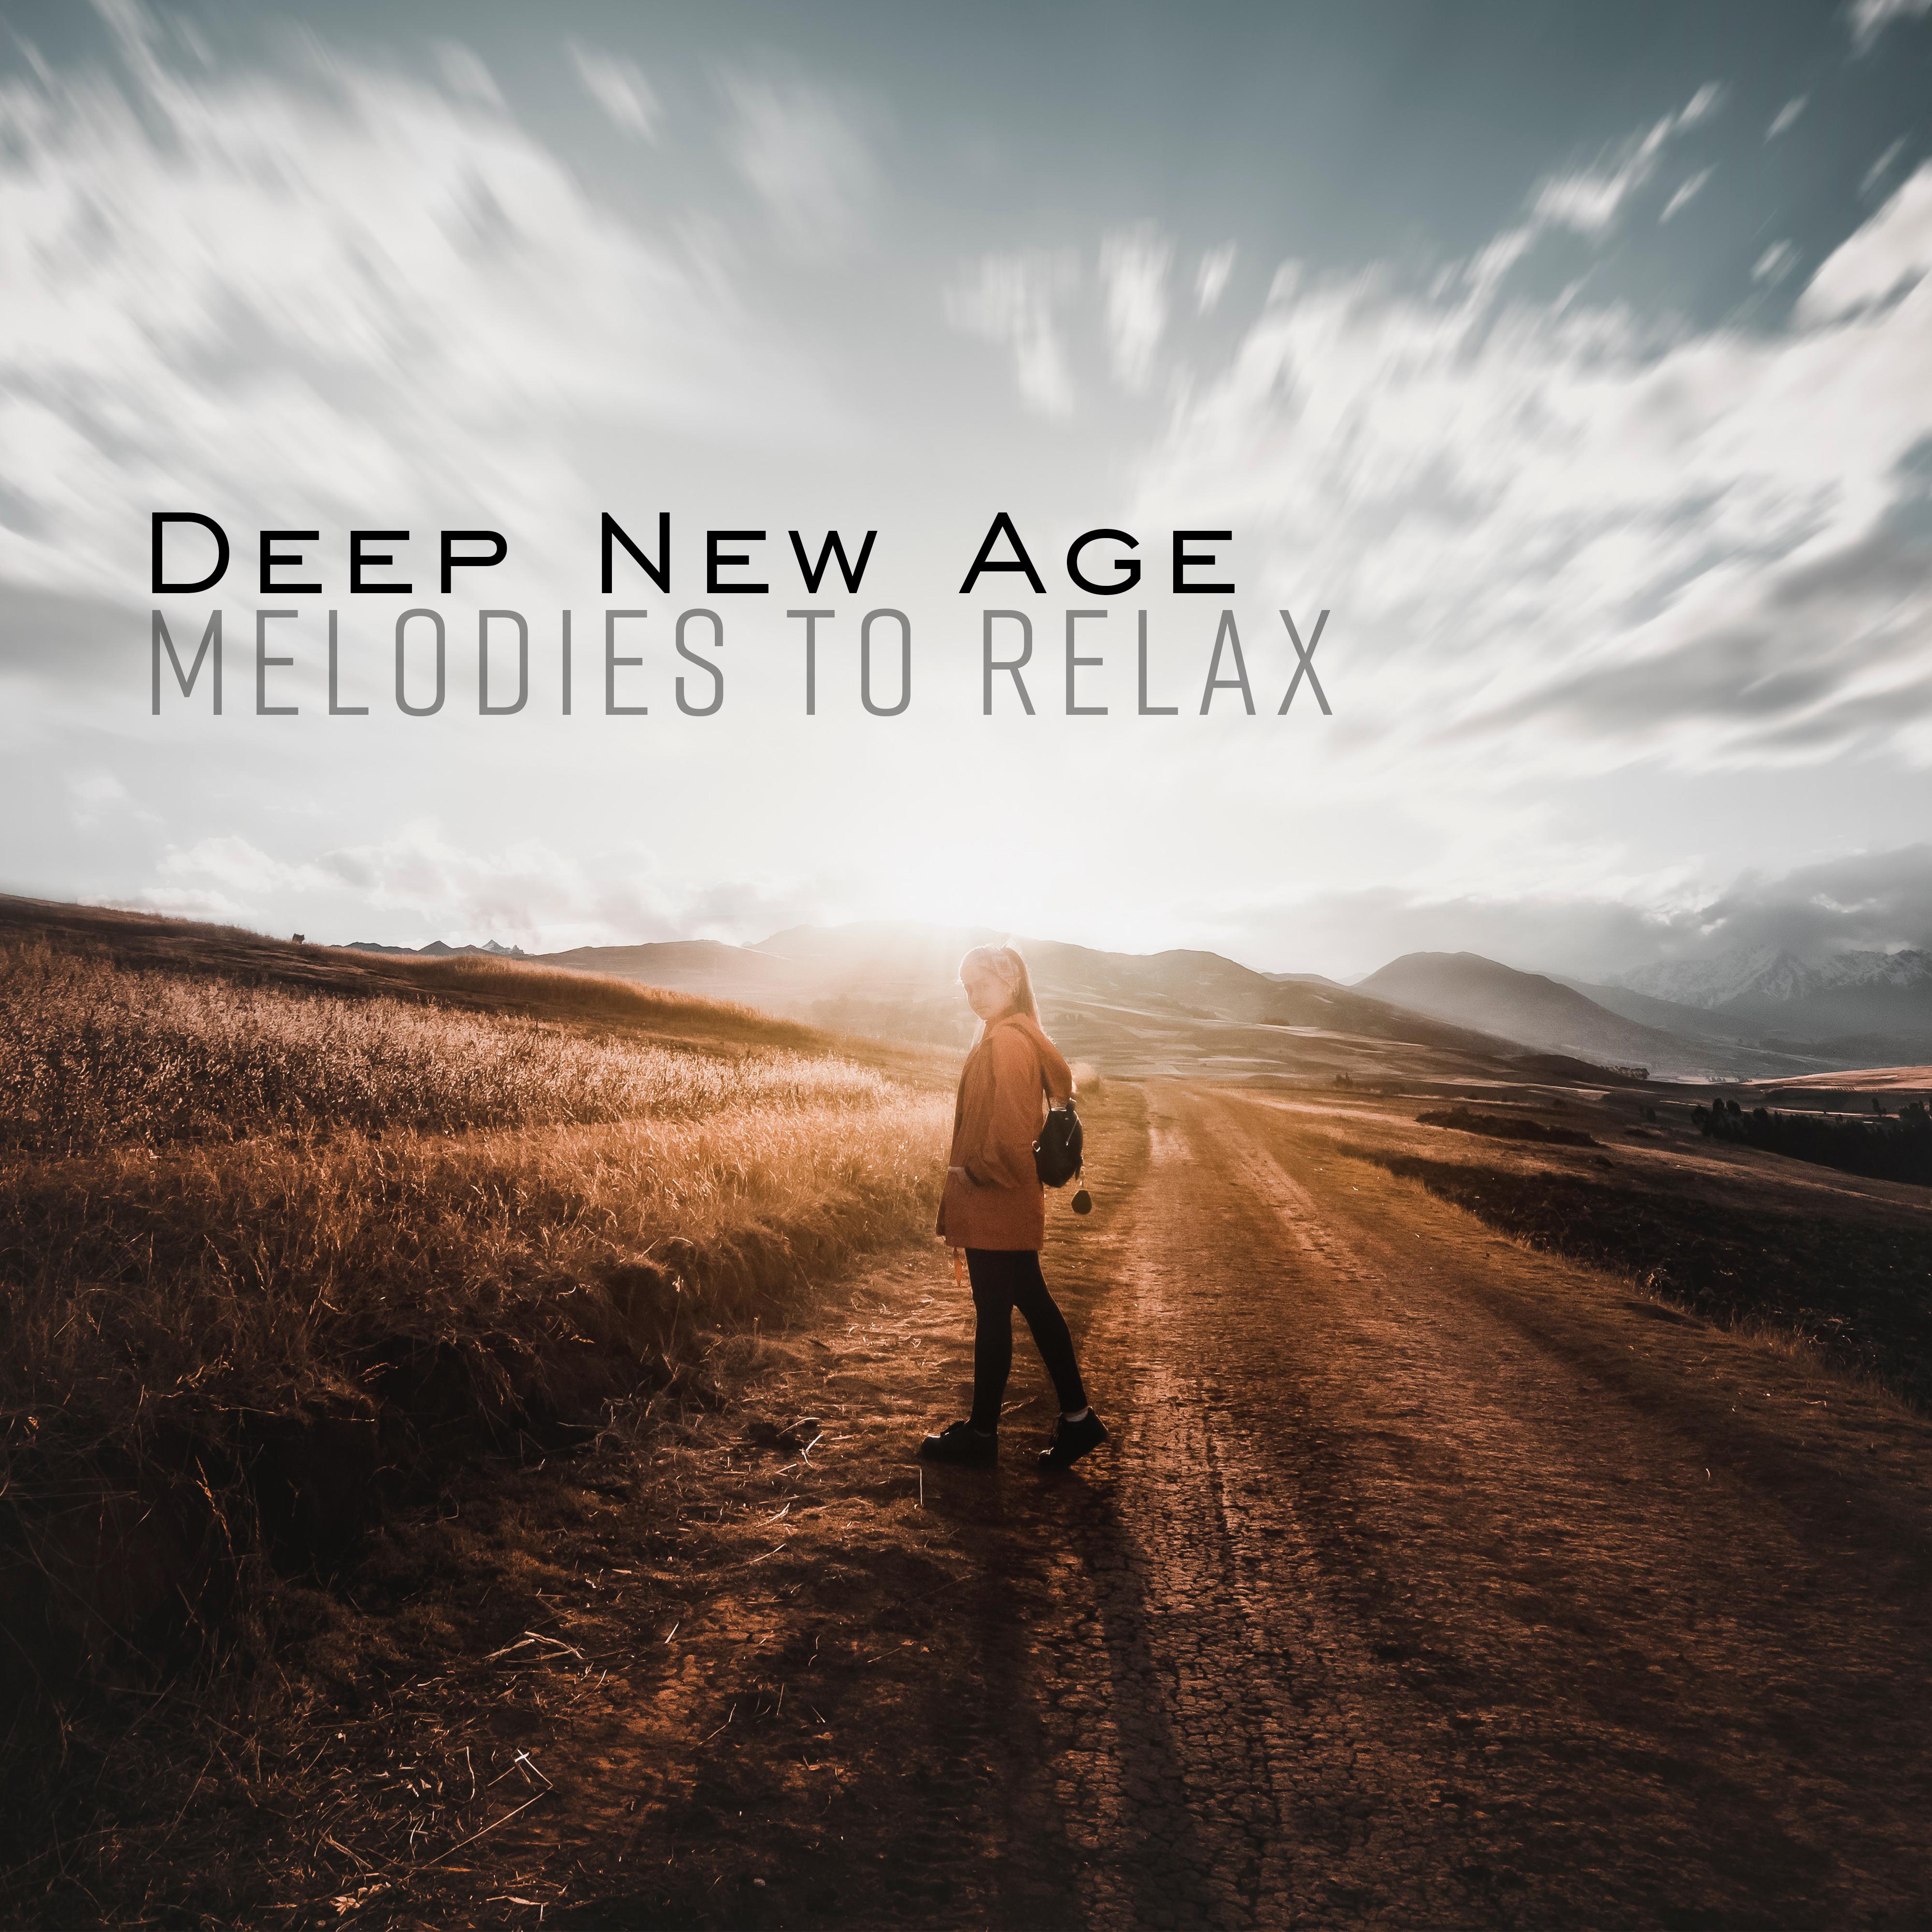 Deep New Age Melodies to Relax